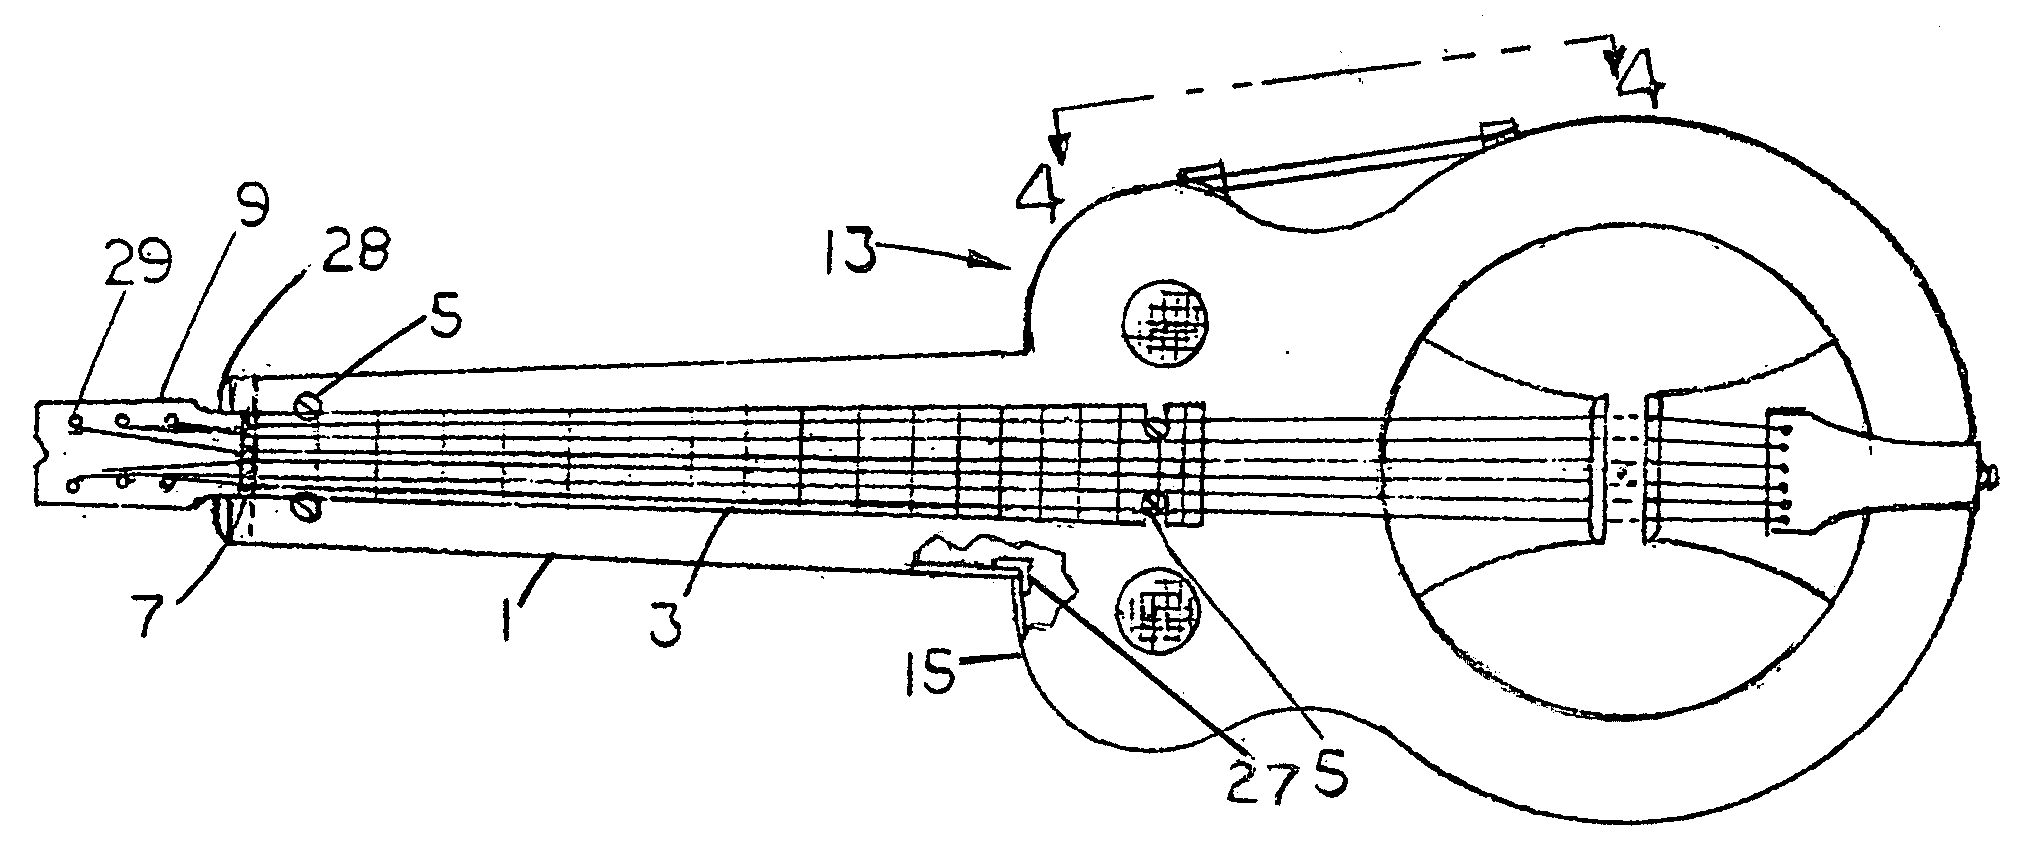 Dobro type guitar with soundbox extension in place of a neck